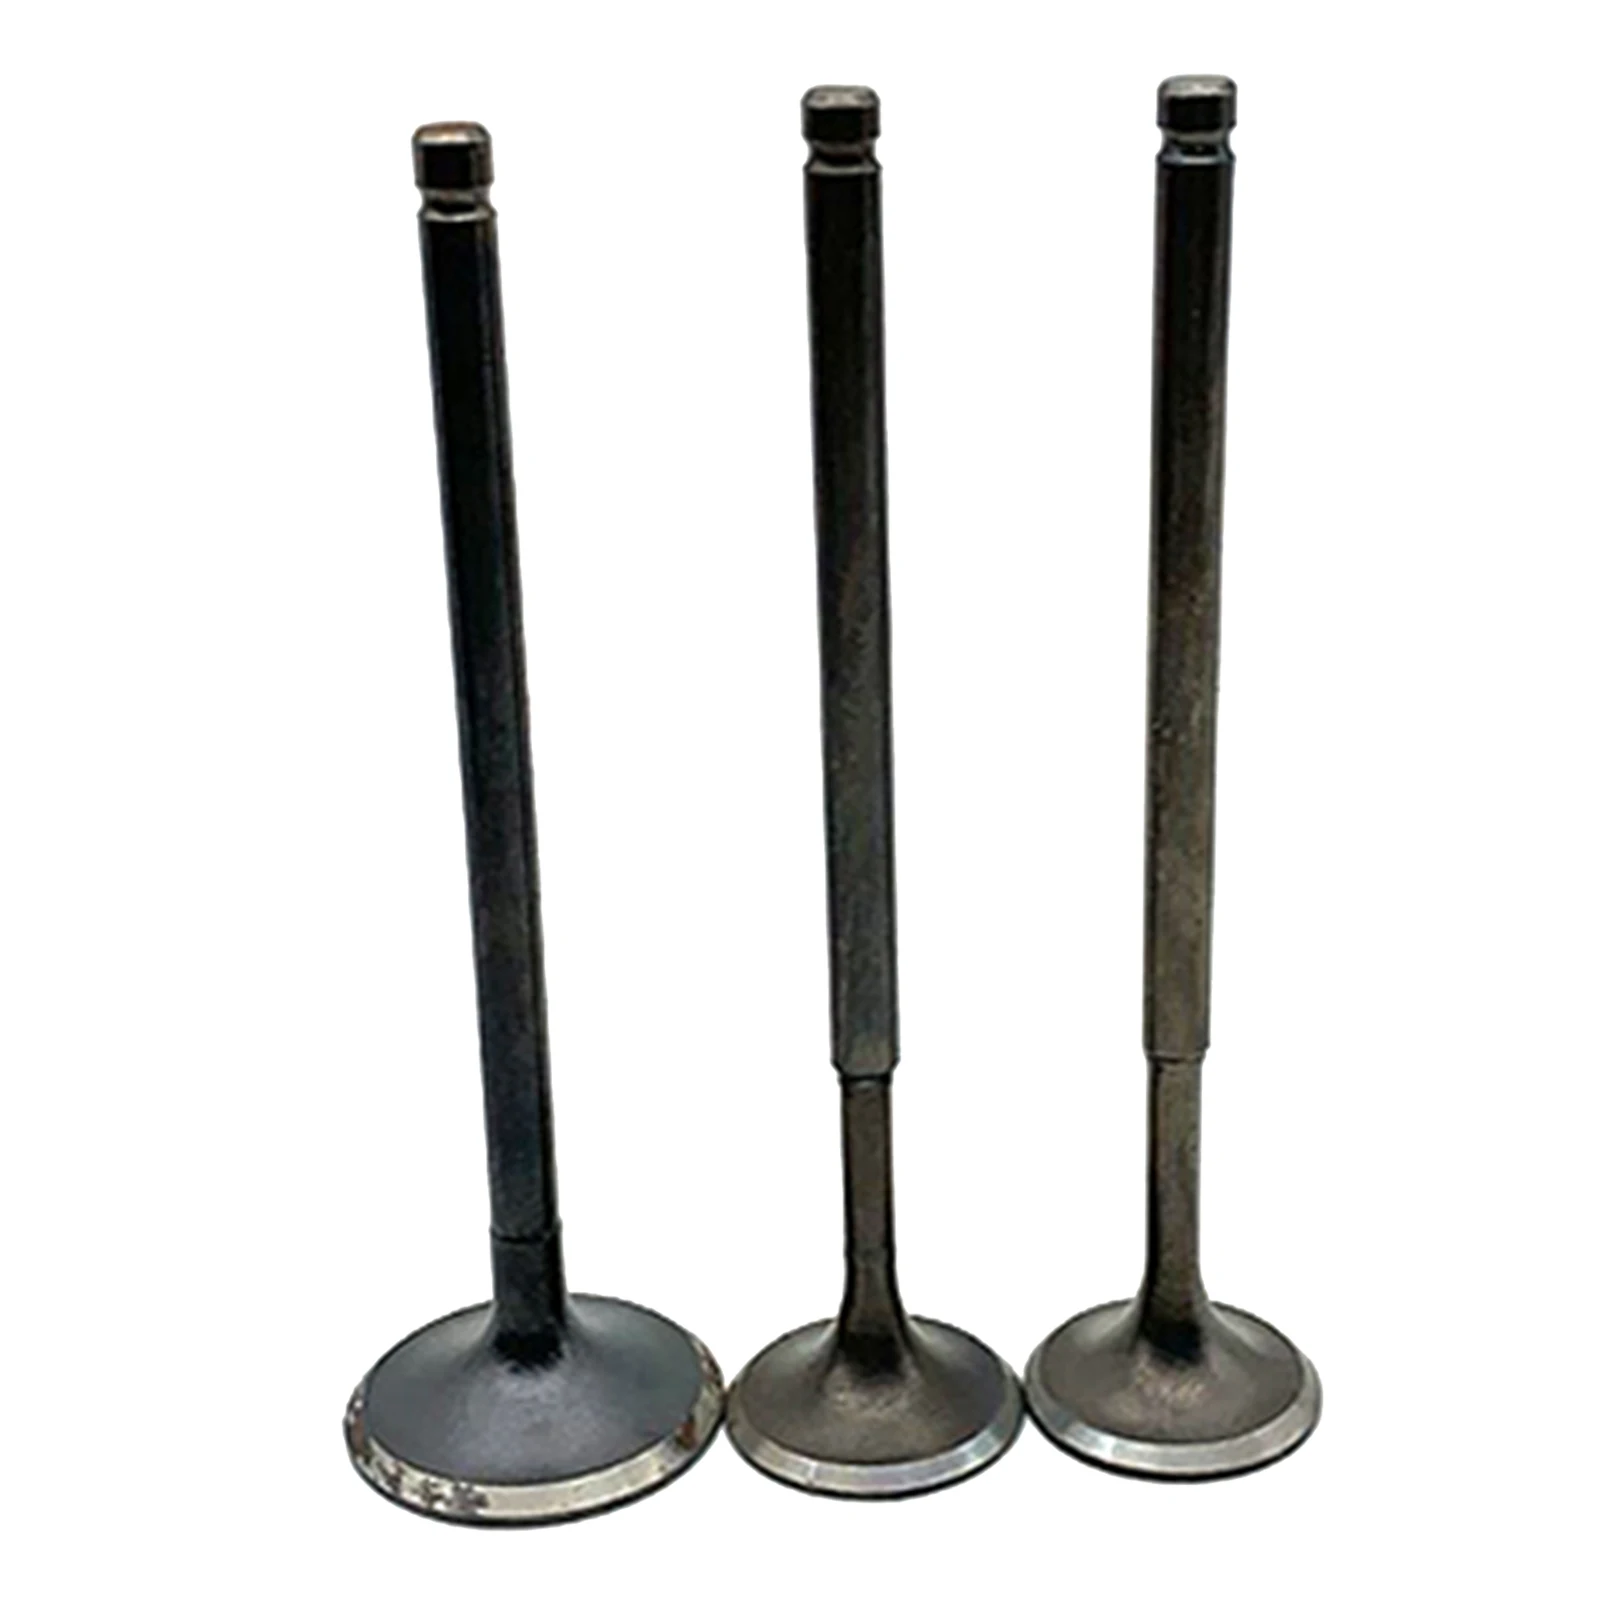 Engine Intake Valves & Exhaust Valves for Honda STEED400 STEED 400 NV400